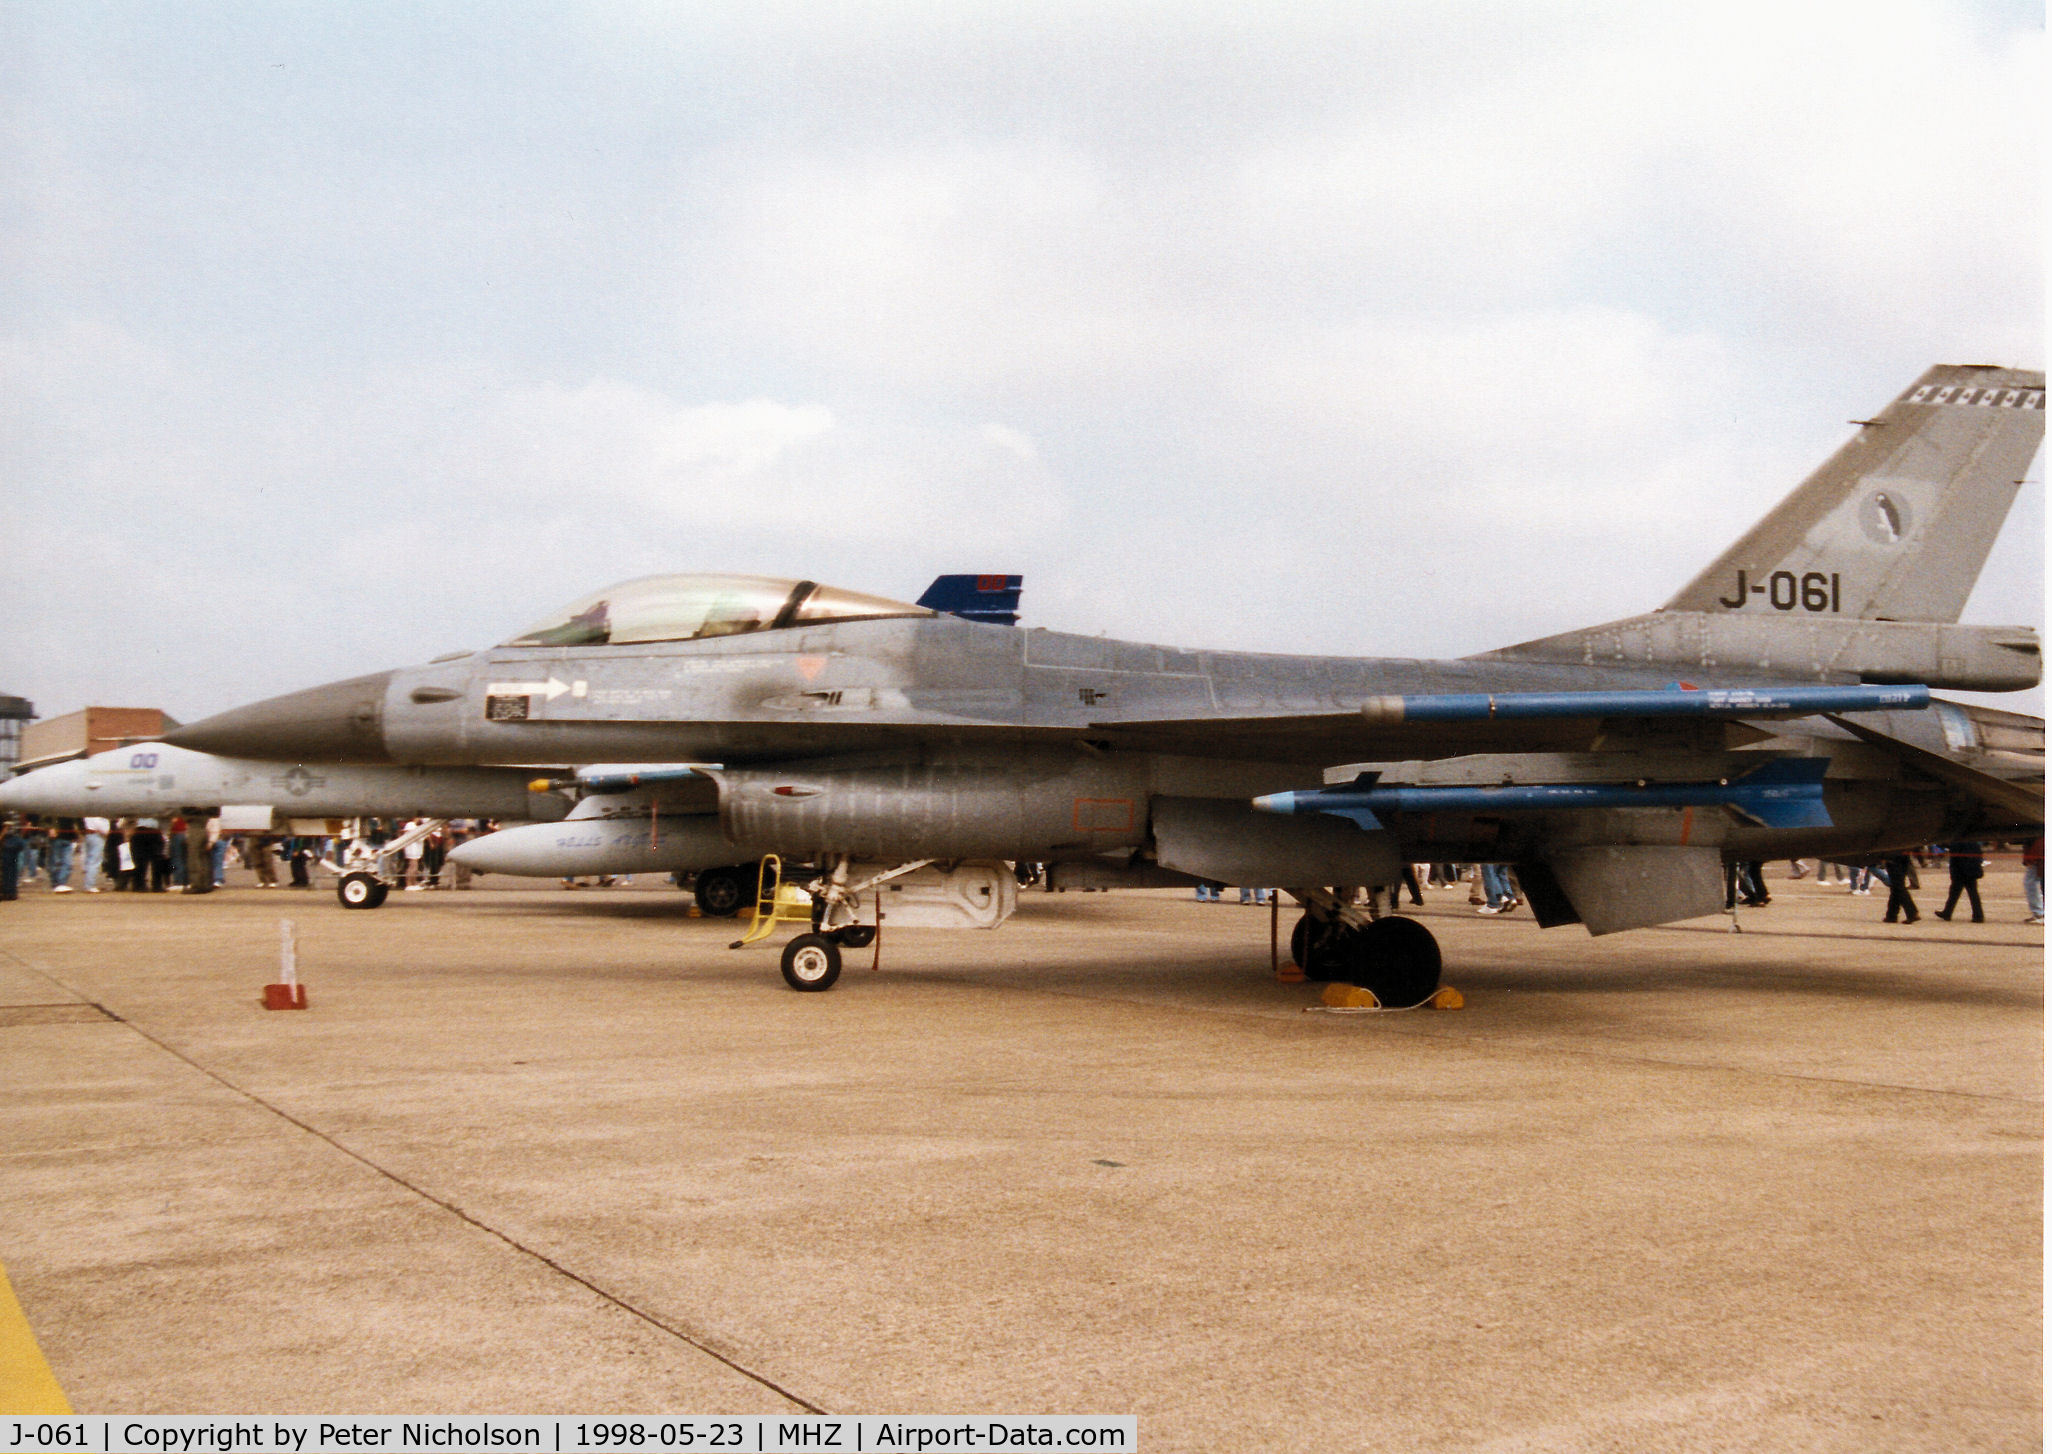 J-061, Fokker F-16AM Fighting Falcon C/N 6D-144, Anorther view of this Leeuwarden based F-16A Falcon of the Royal Netherlands Air Force on display at the 1998 RAF Mildenhall Air Fete.